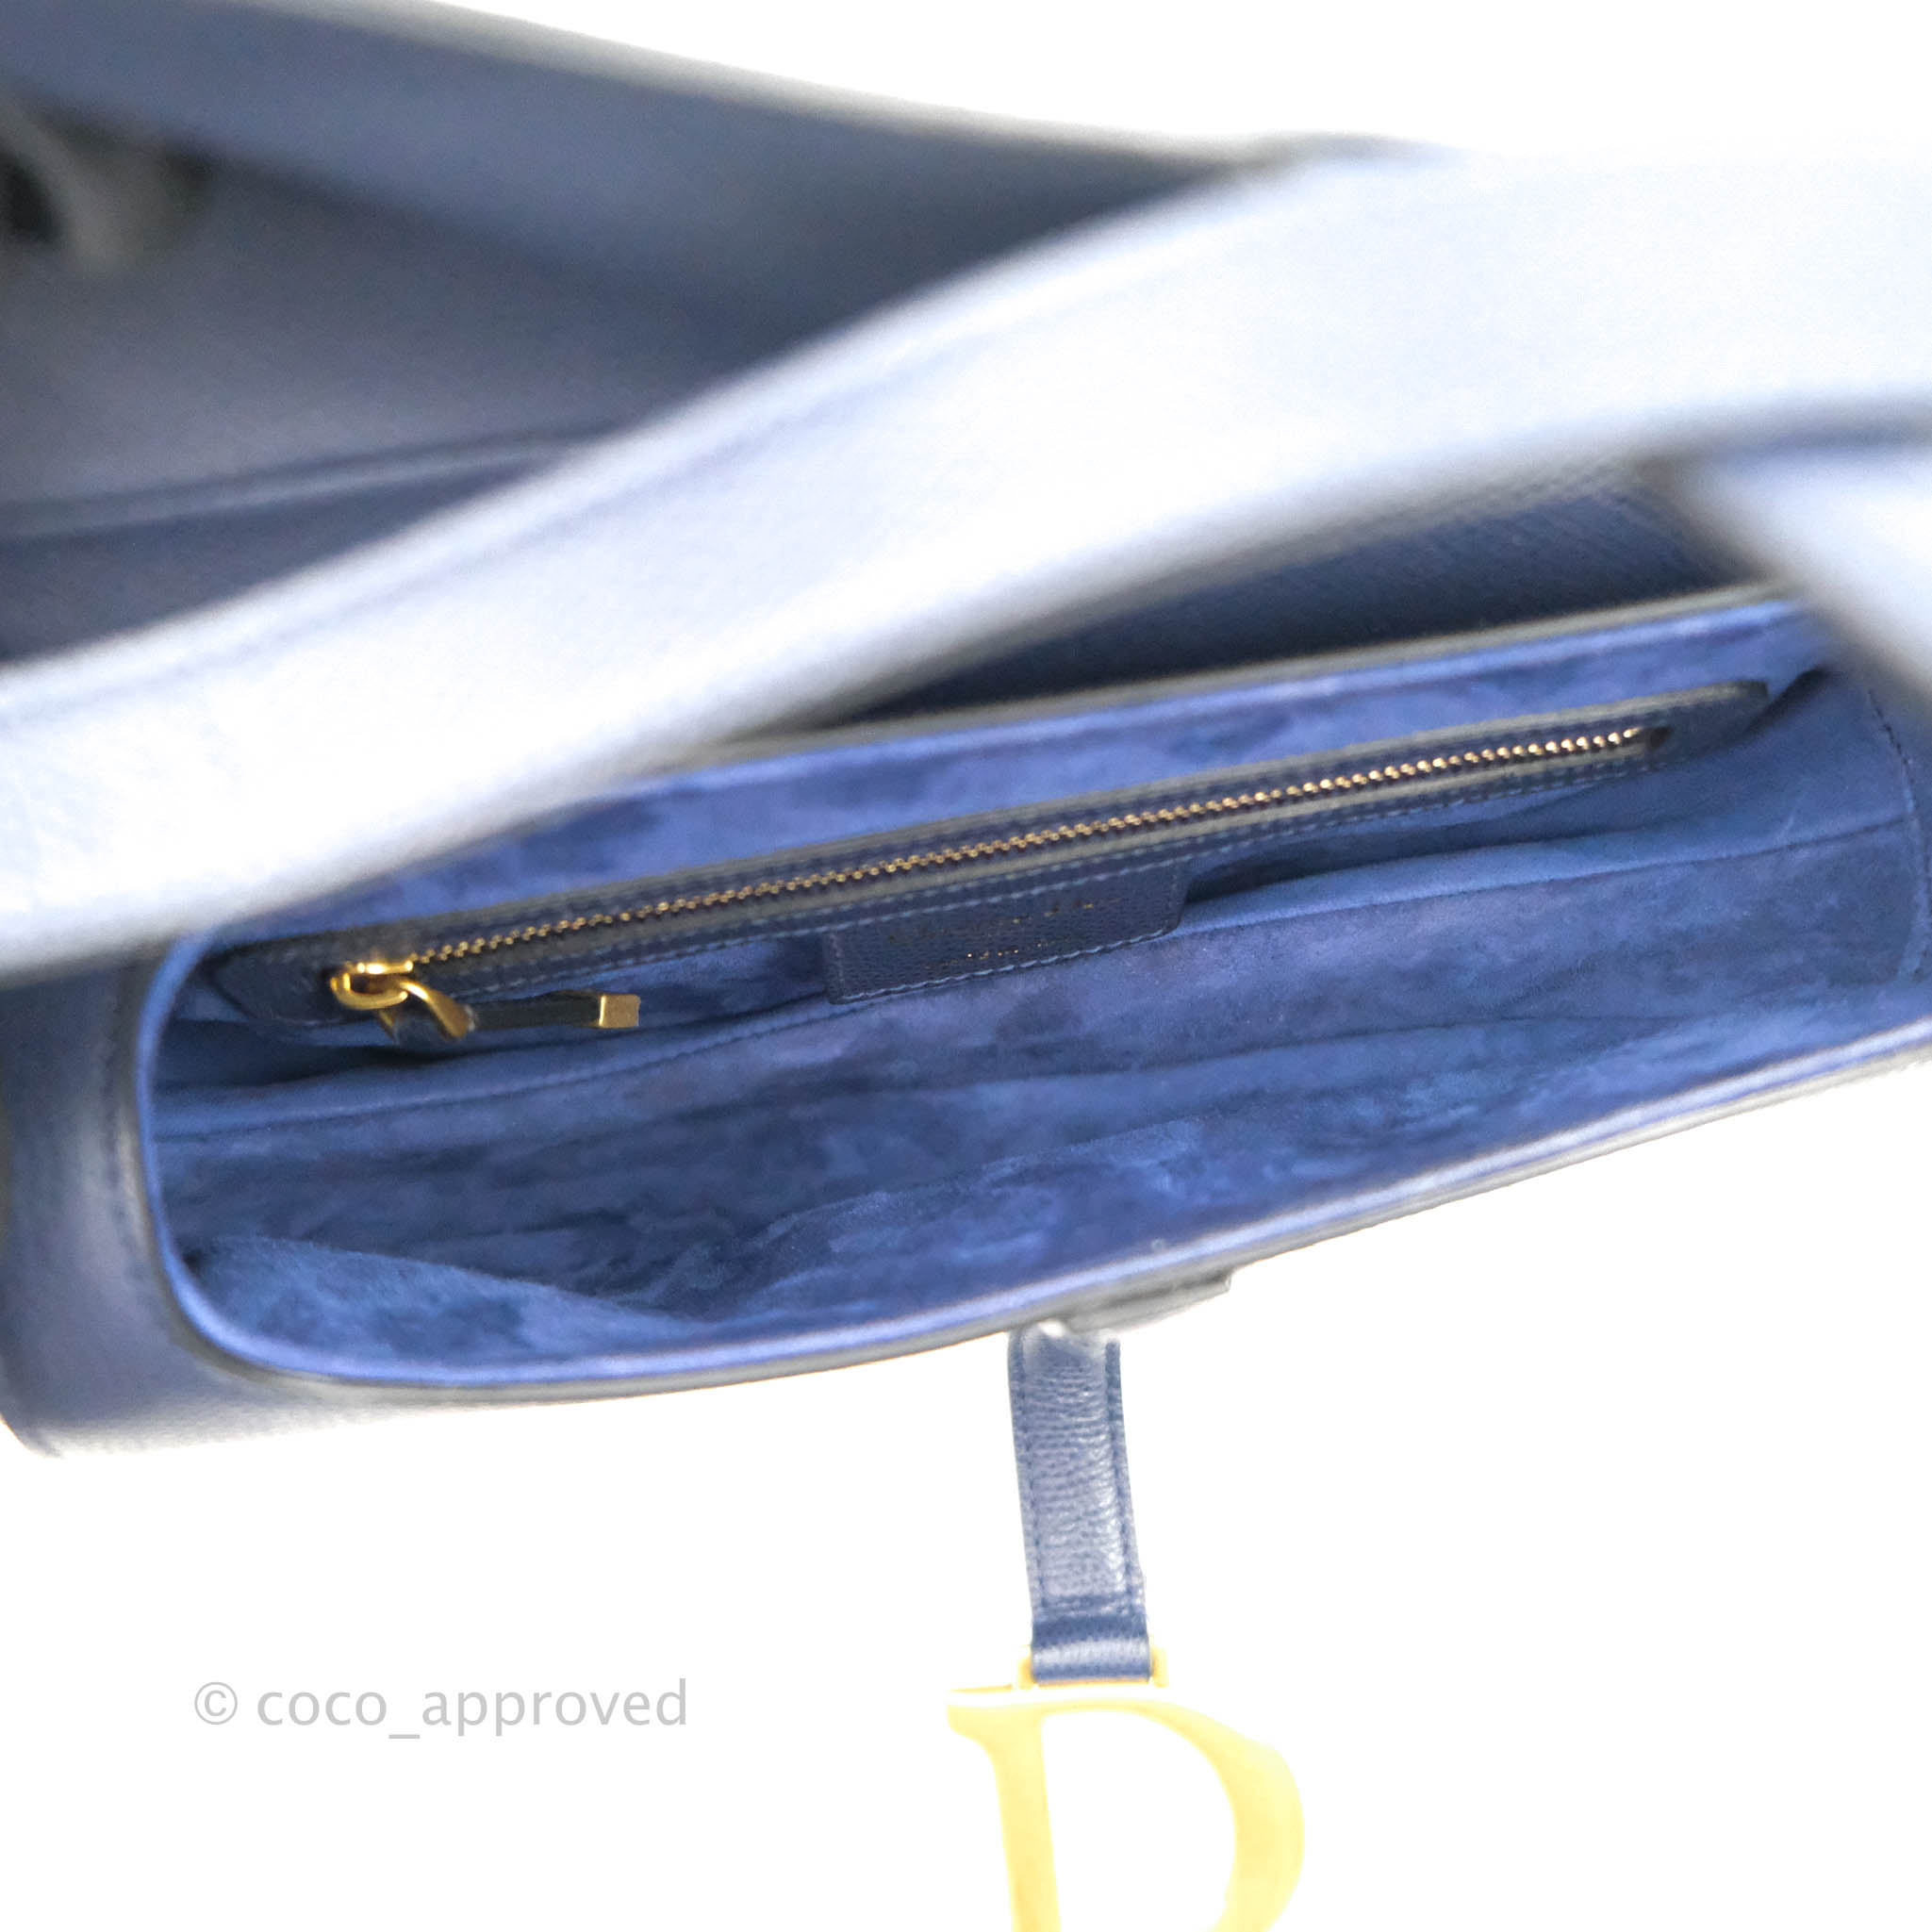 How To Spot A Fake Christian Dior Saddle Bag - Brands Blogger in